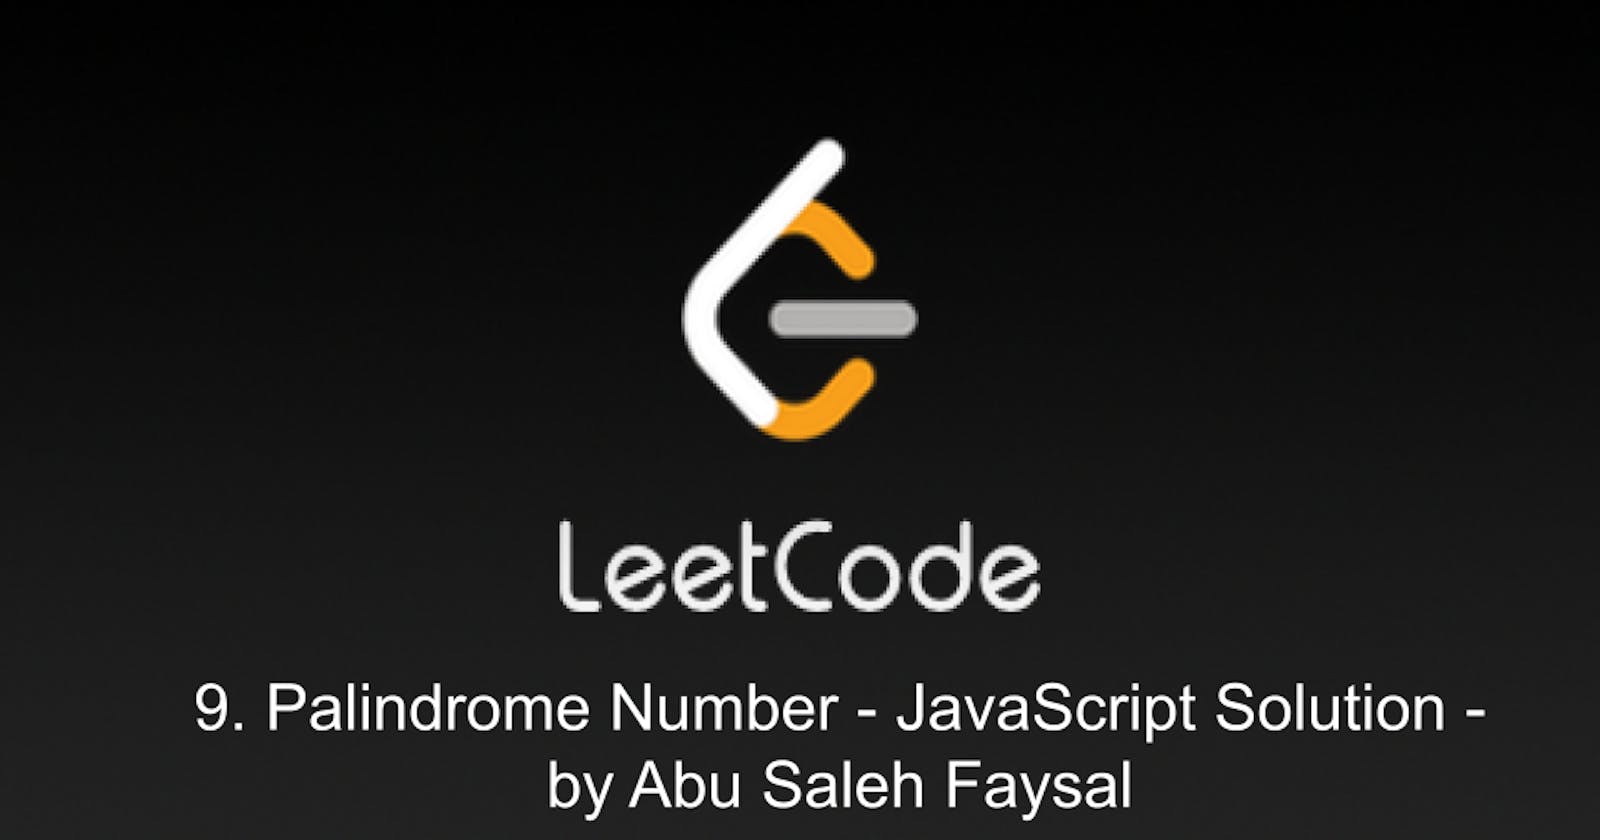 9. Palindrome Number - JavaScript Solution - by Abu Saleh Faysal